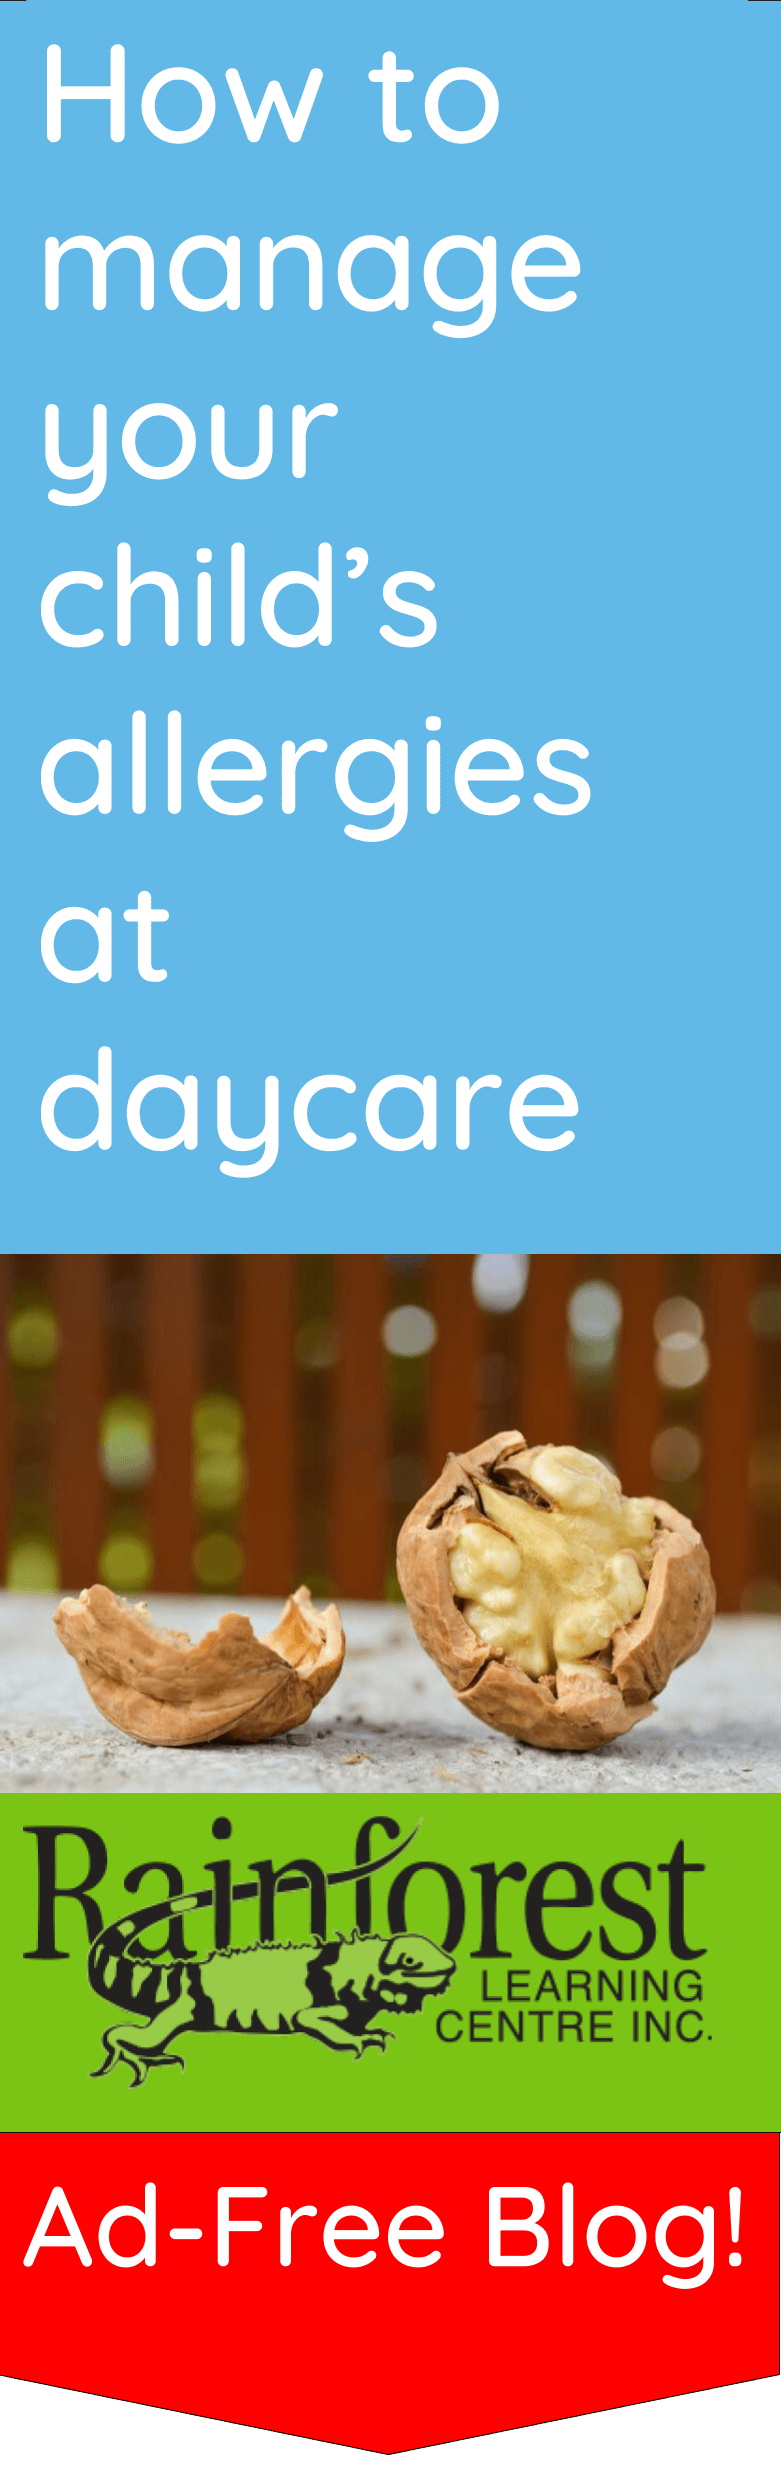 How to manage your child’s allergies at daycare - pinterest image